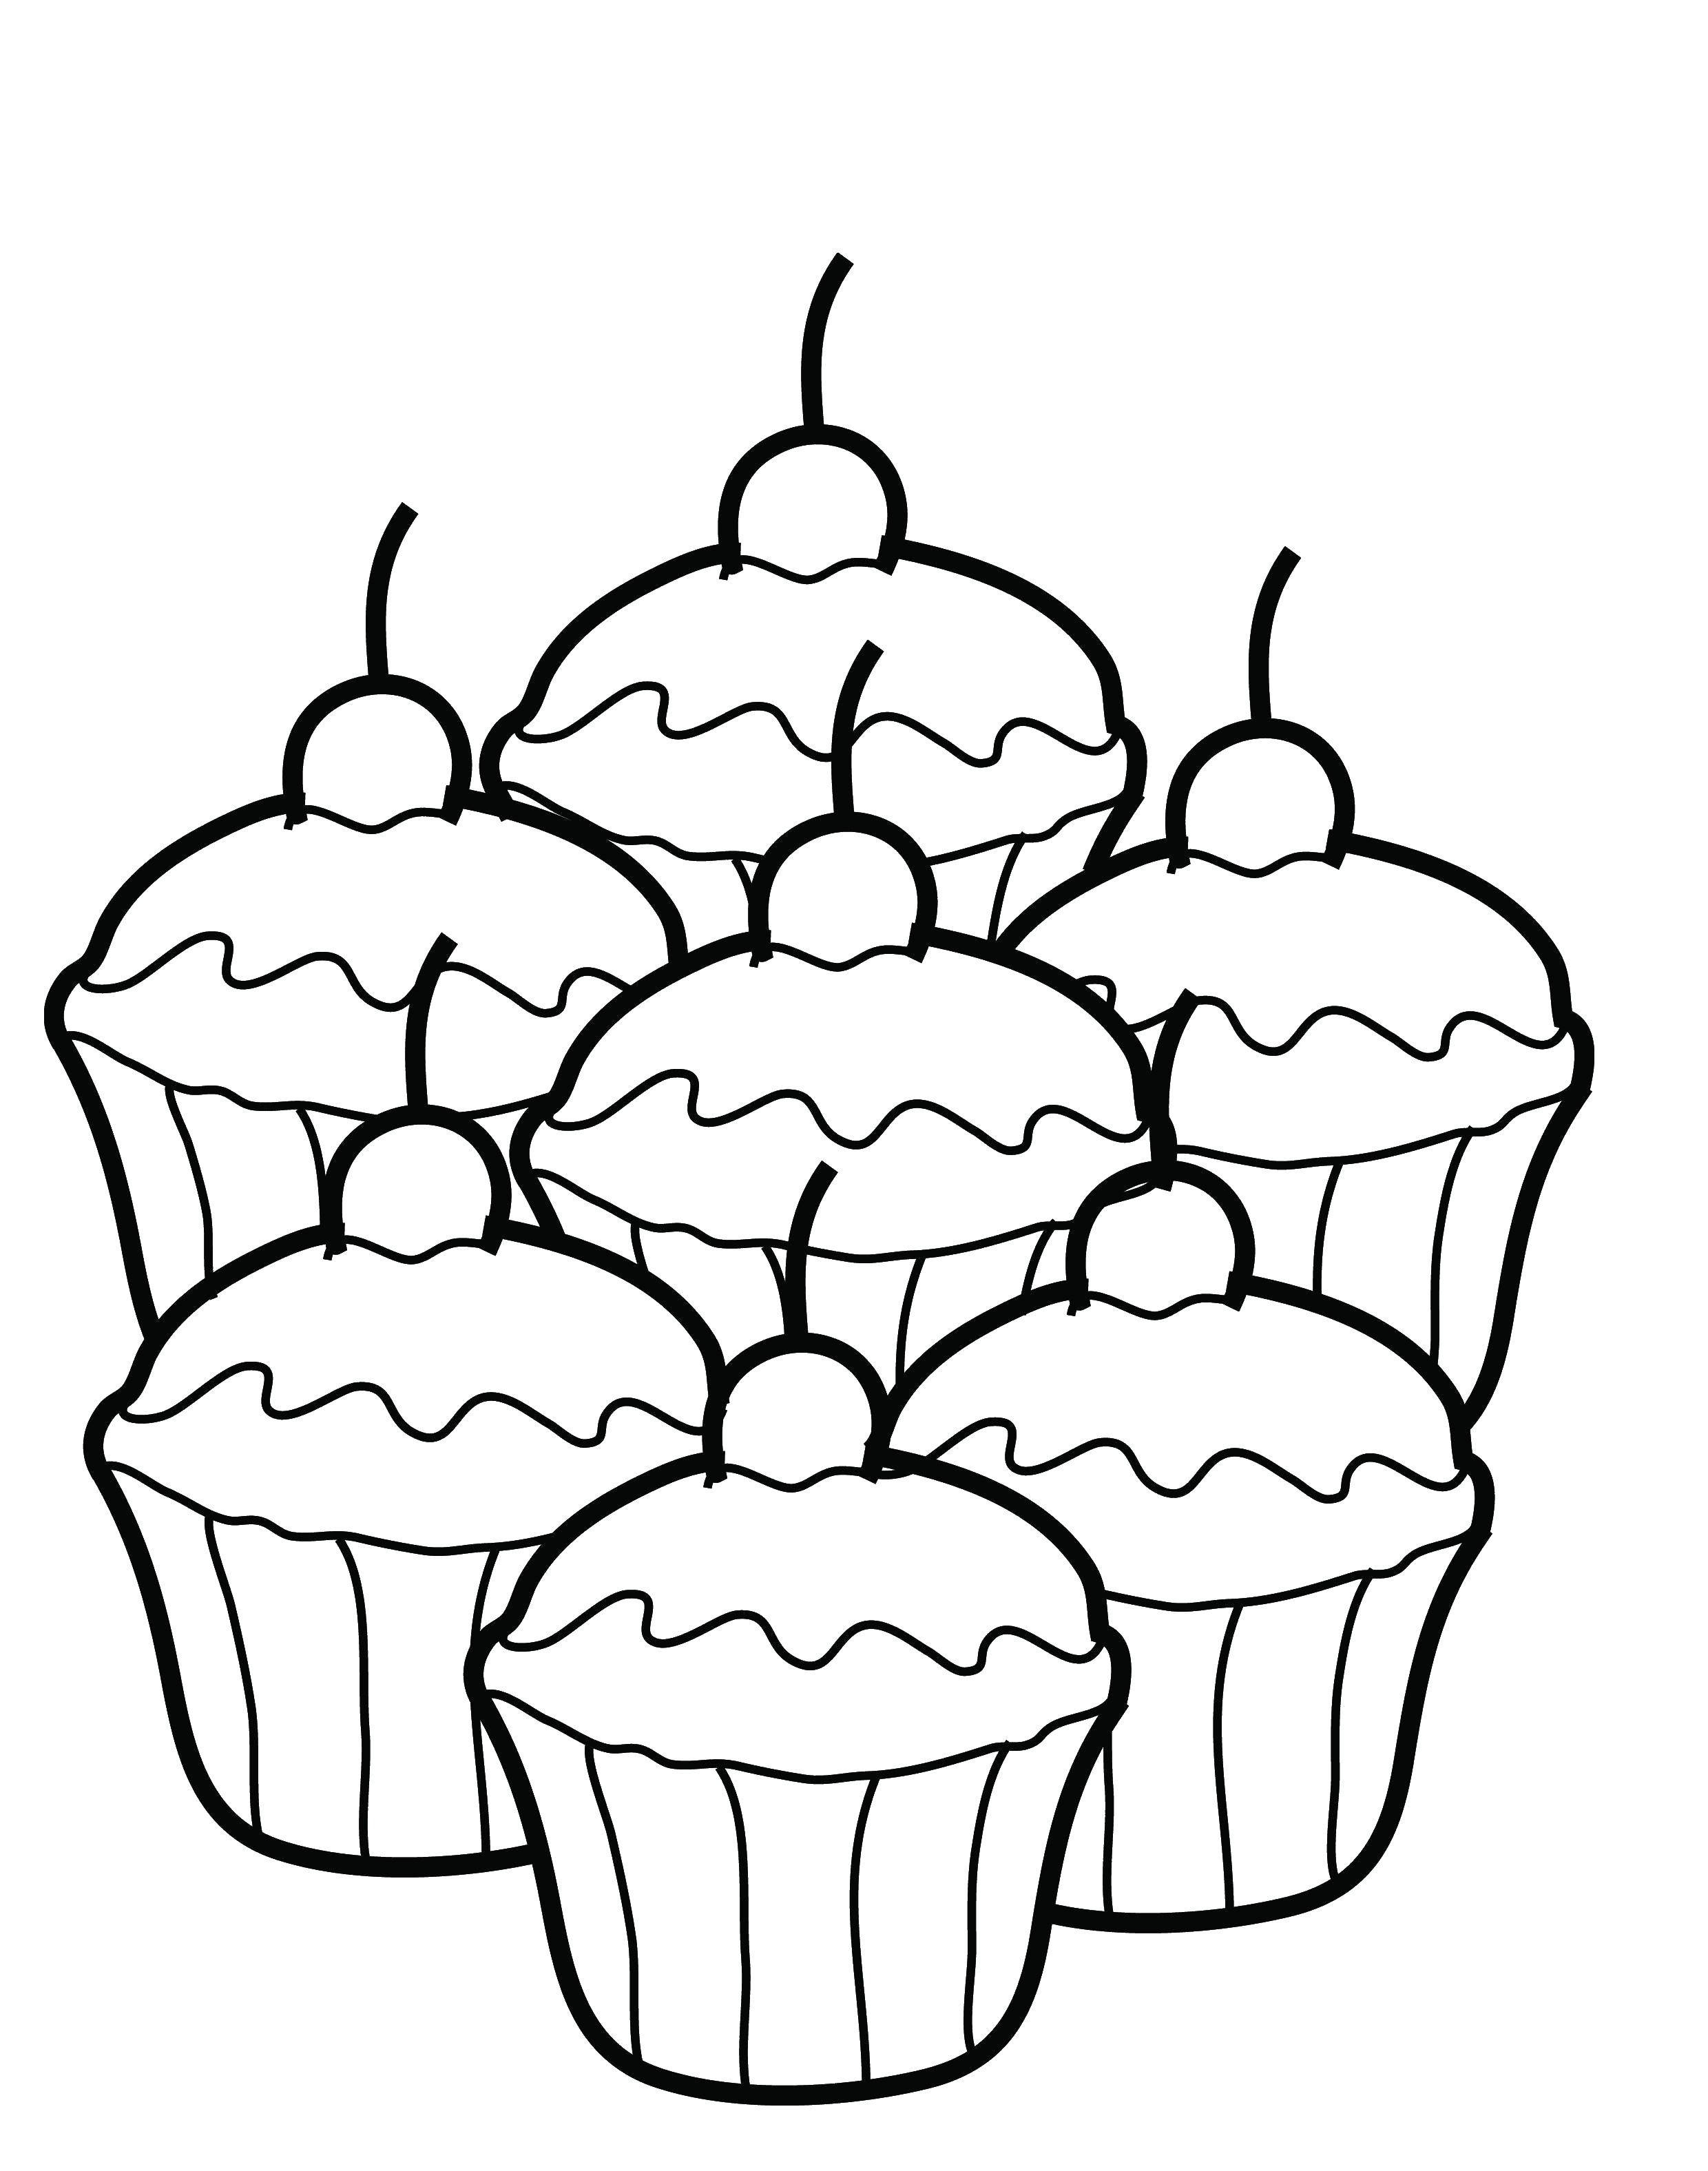 Coloring Cherry on top cupcakes. Category sweets. Tags:  Sweets.